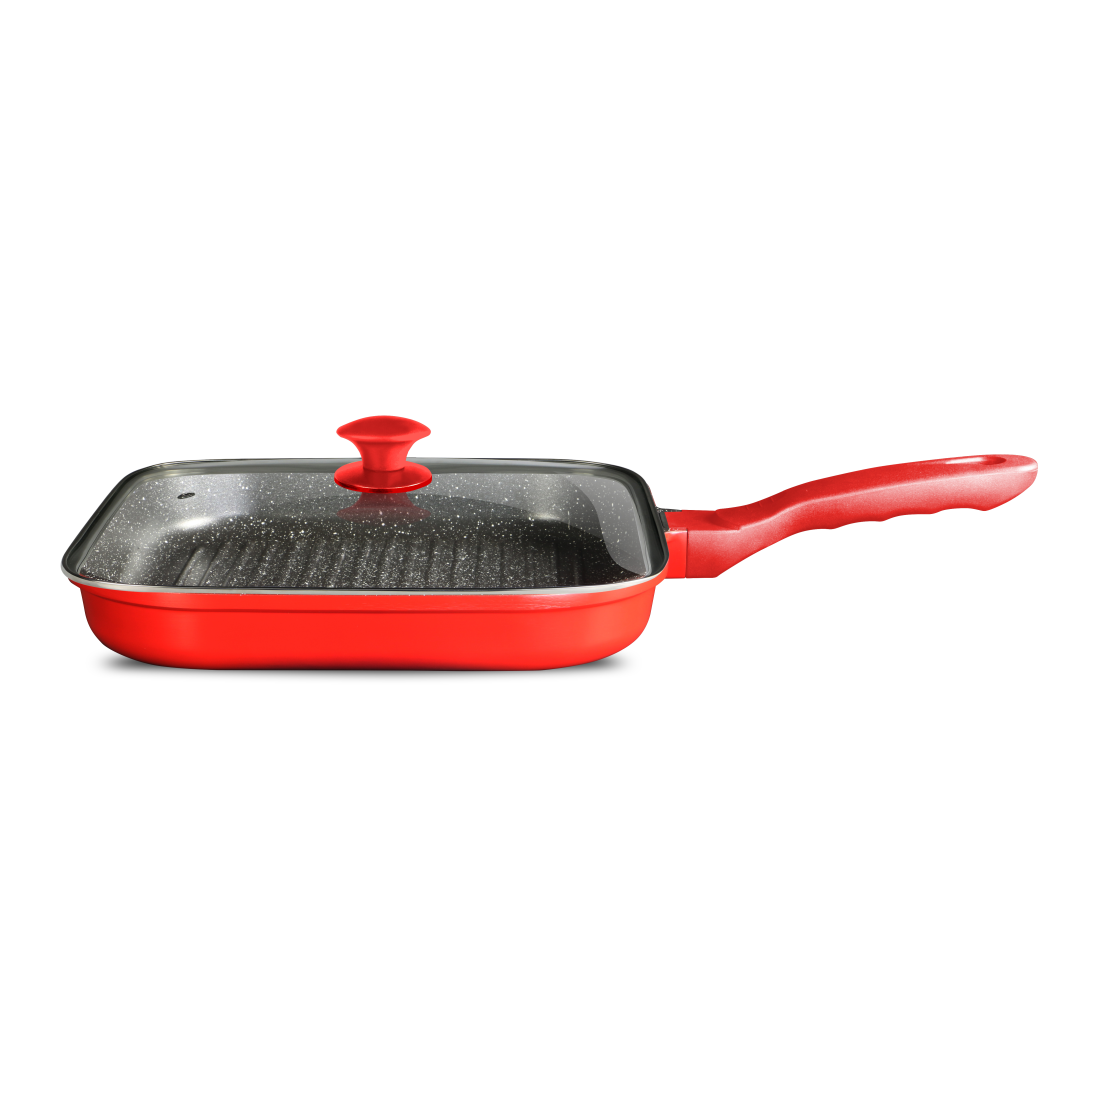 Grill + capac, 28x4 cm, Home Chef